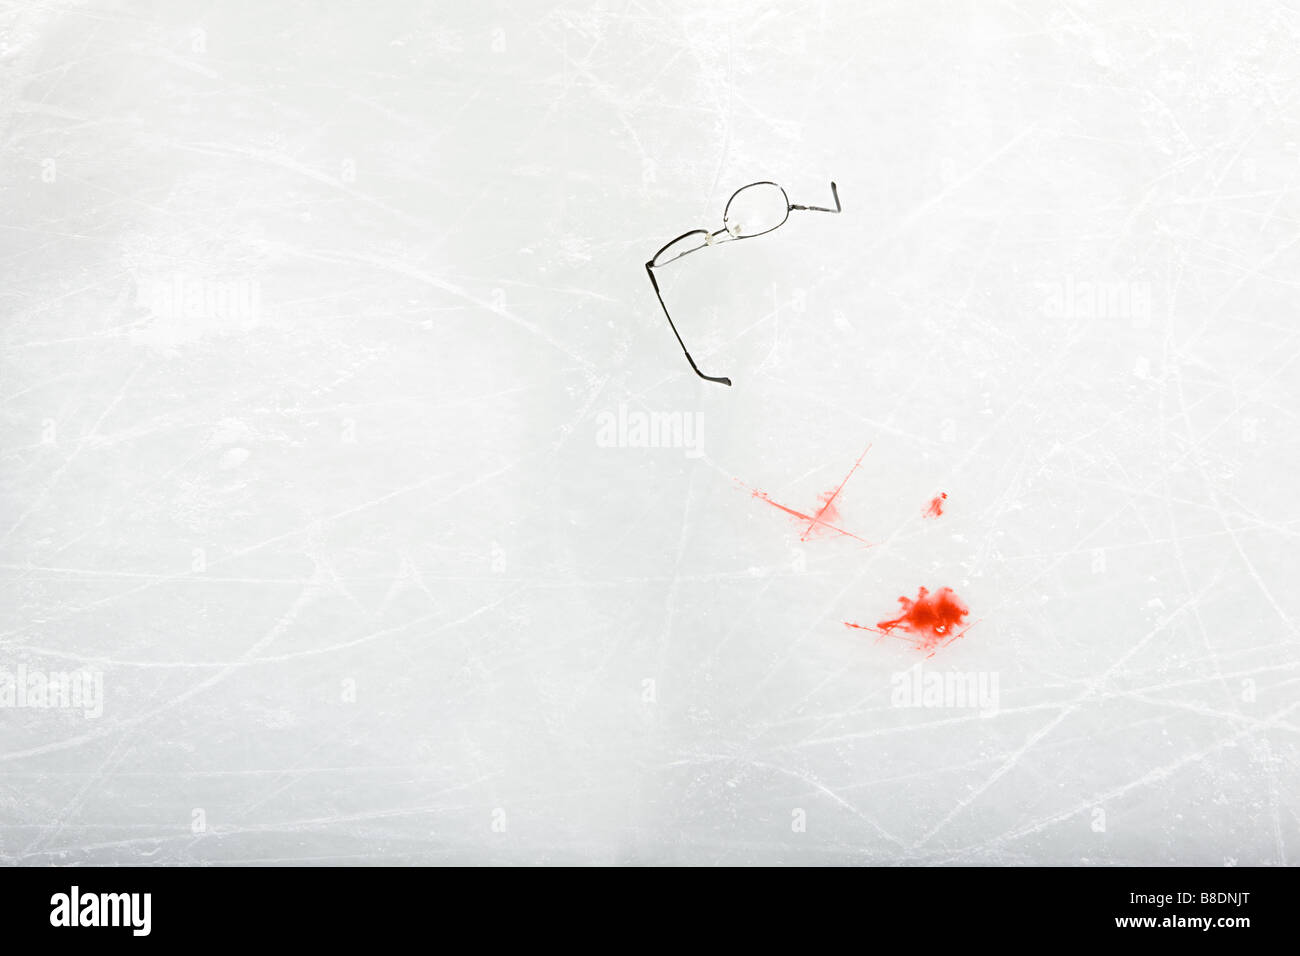 Eyeglasses and blood on the ice Stock Photo